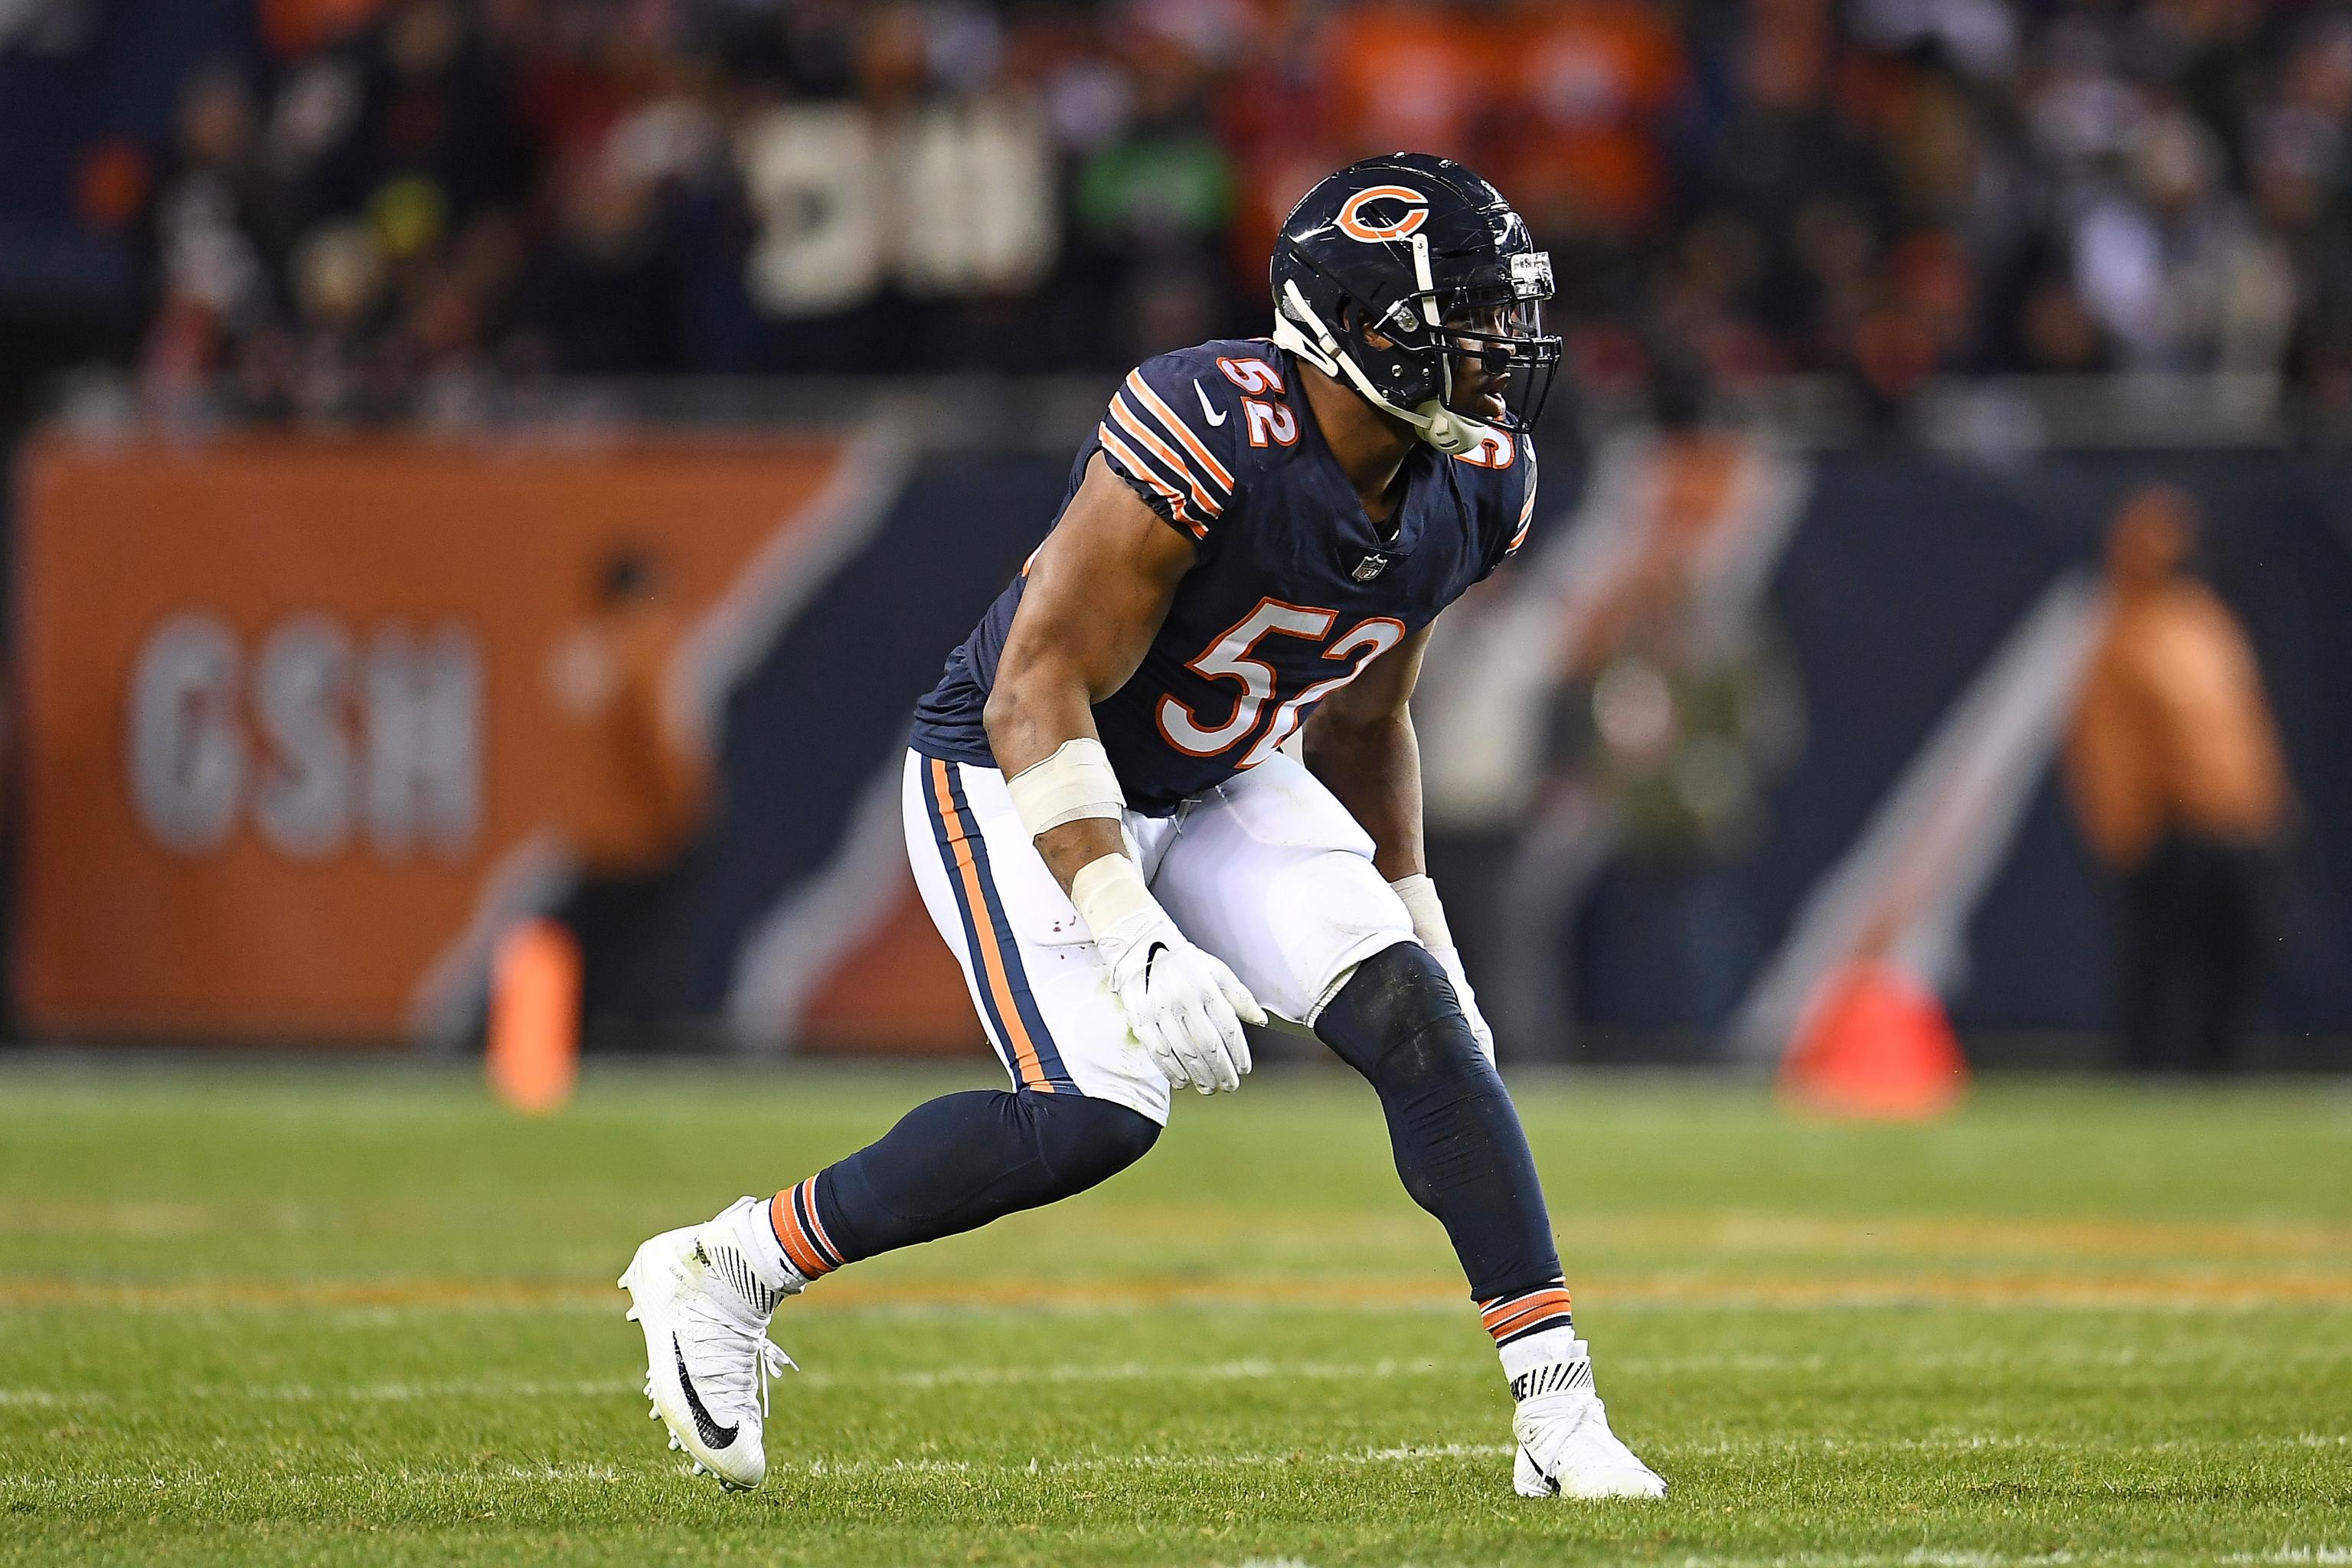 Does Khalil Mack have something to prove? - Windy City Gridiron